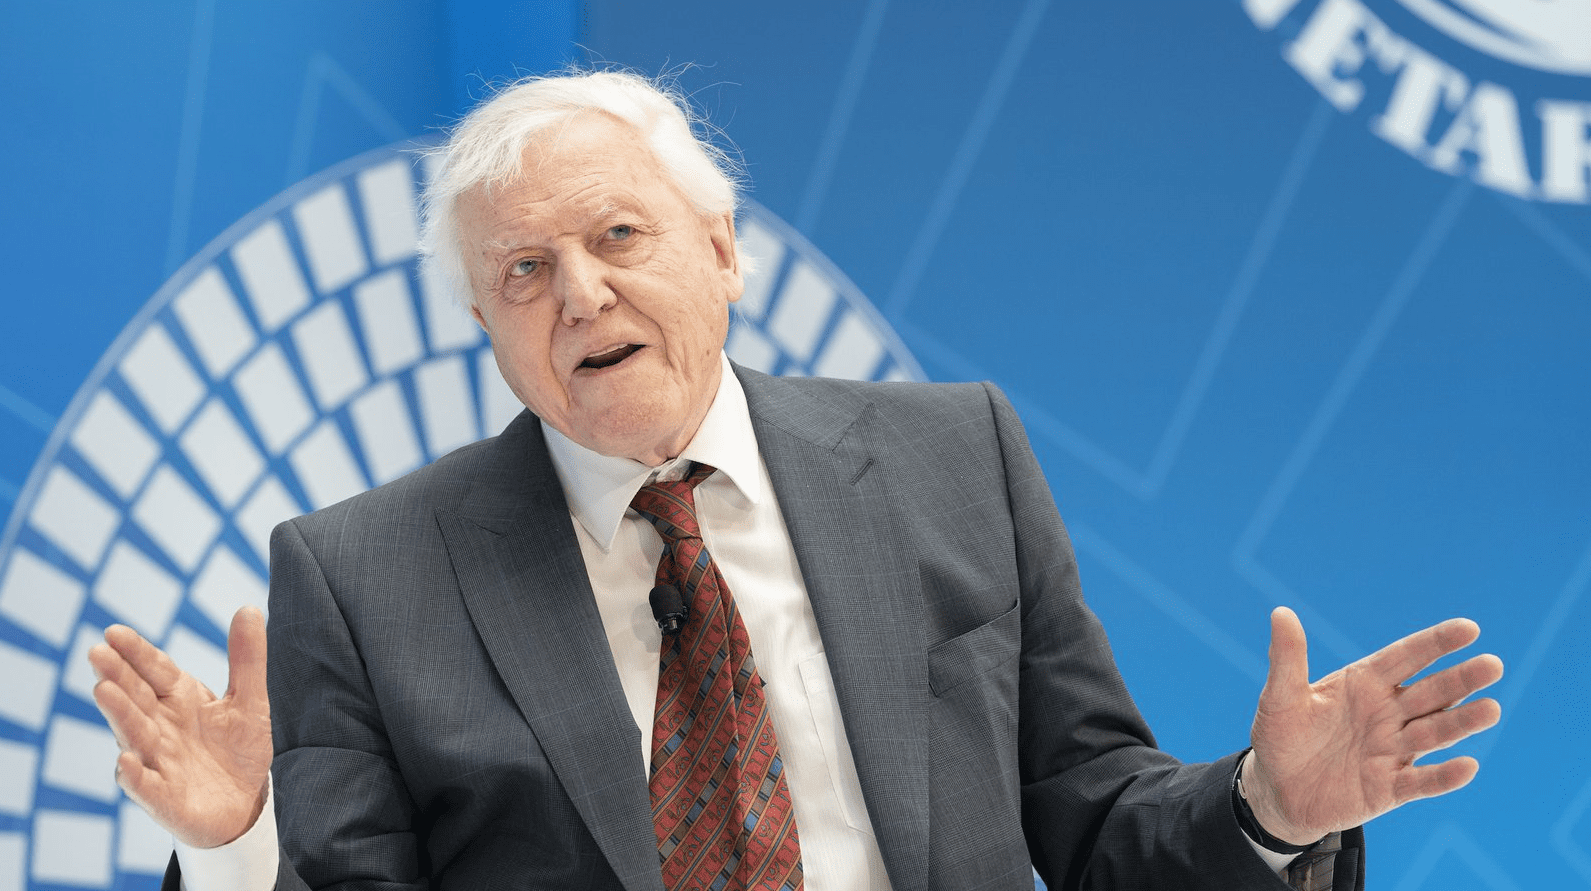 coral-cannot-be-at-record-levels-–-that-is-not-what-sir-david-attenborough-told-me